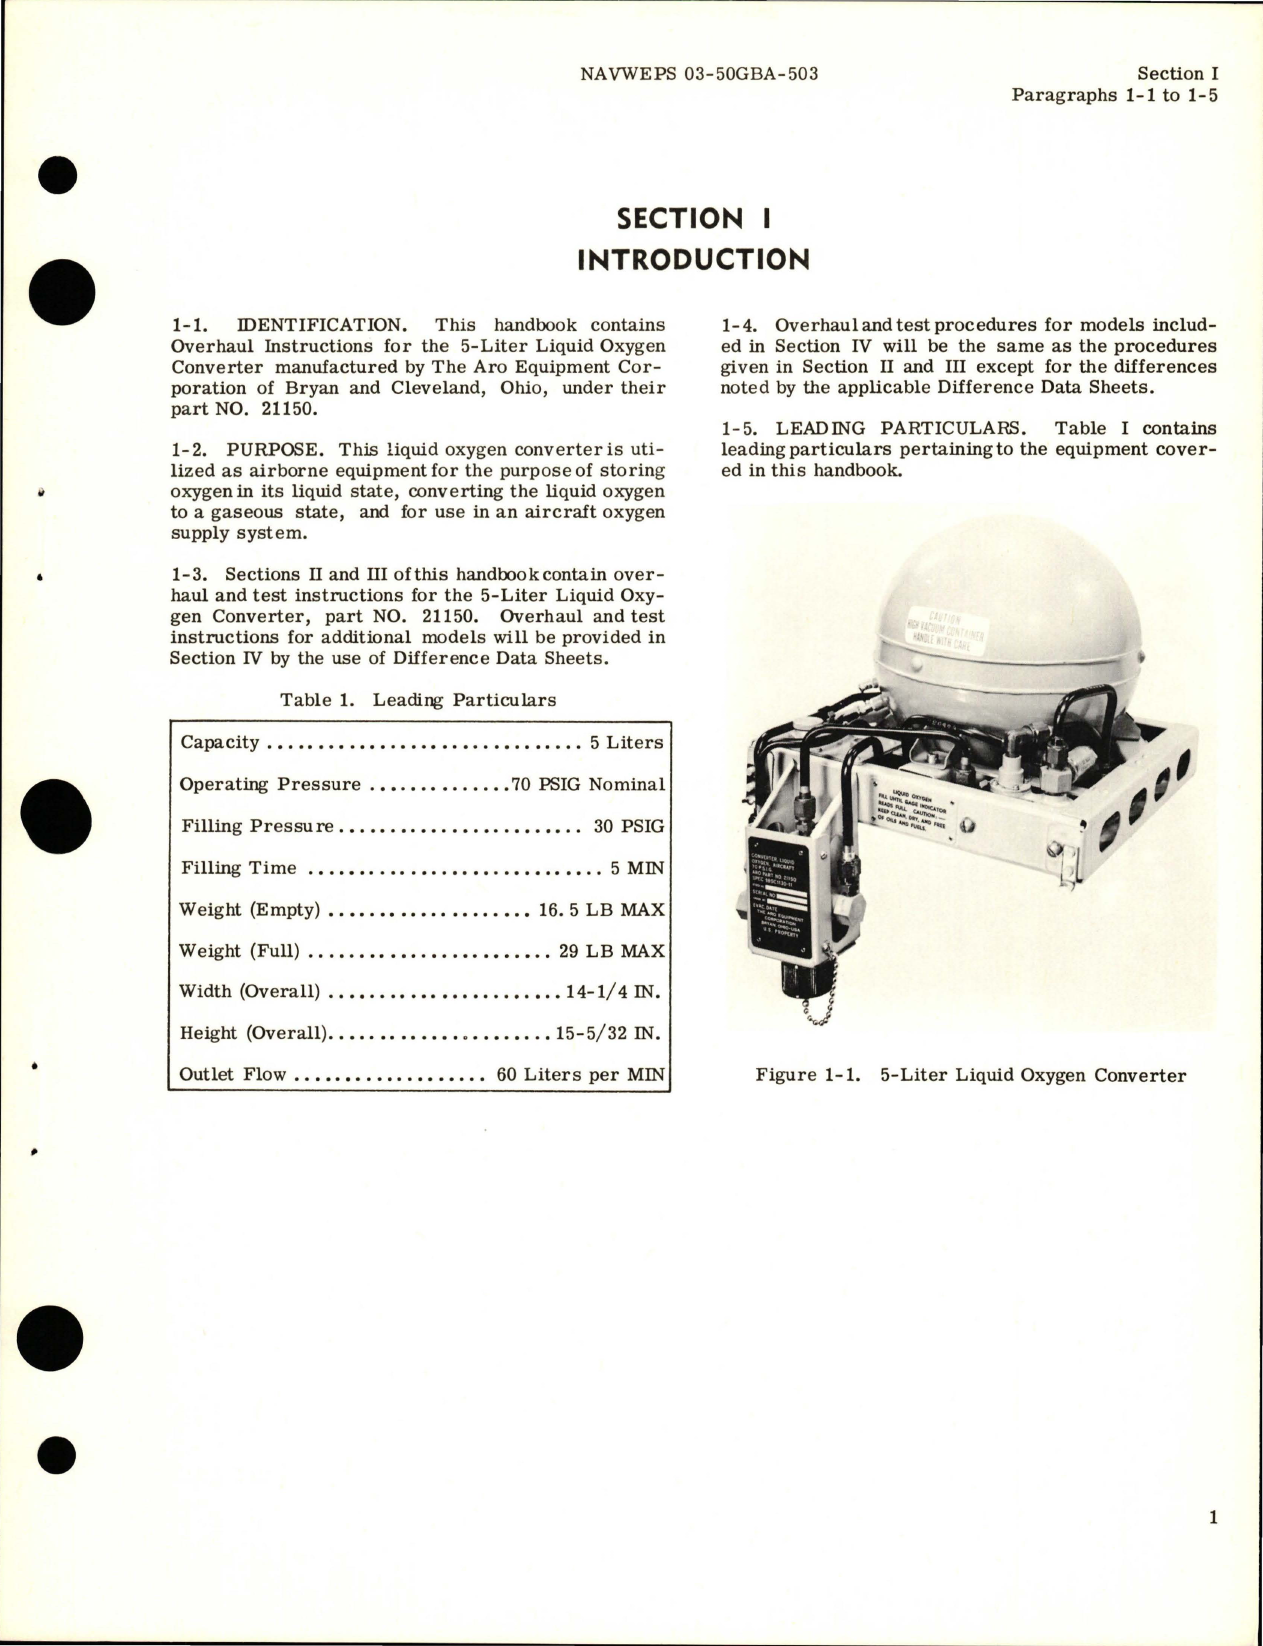 Sample page 5 from AirCorps Library document: Overhaul Instructions for 5-Liter Liquid Oxygen Converter - Part 21150 